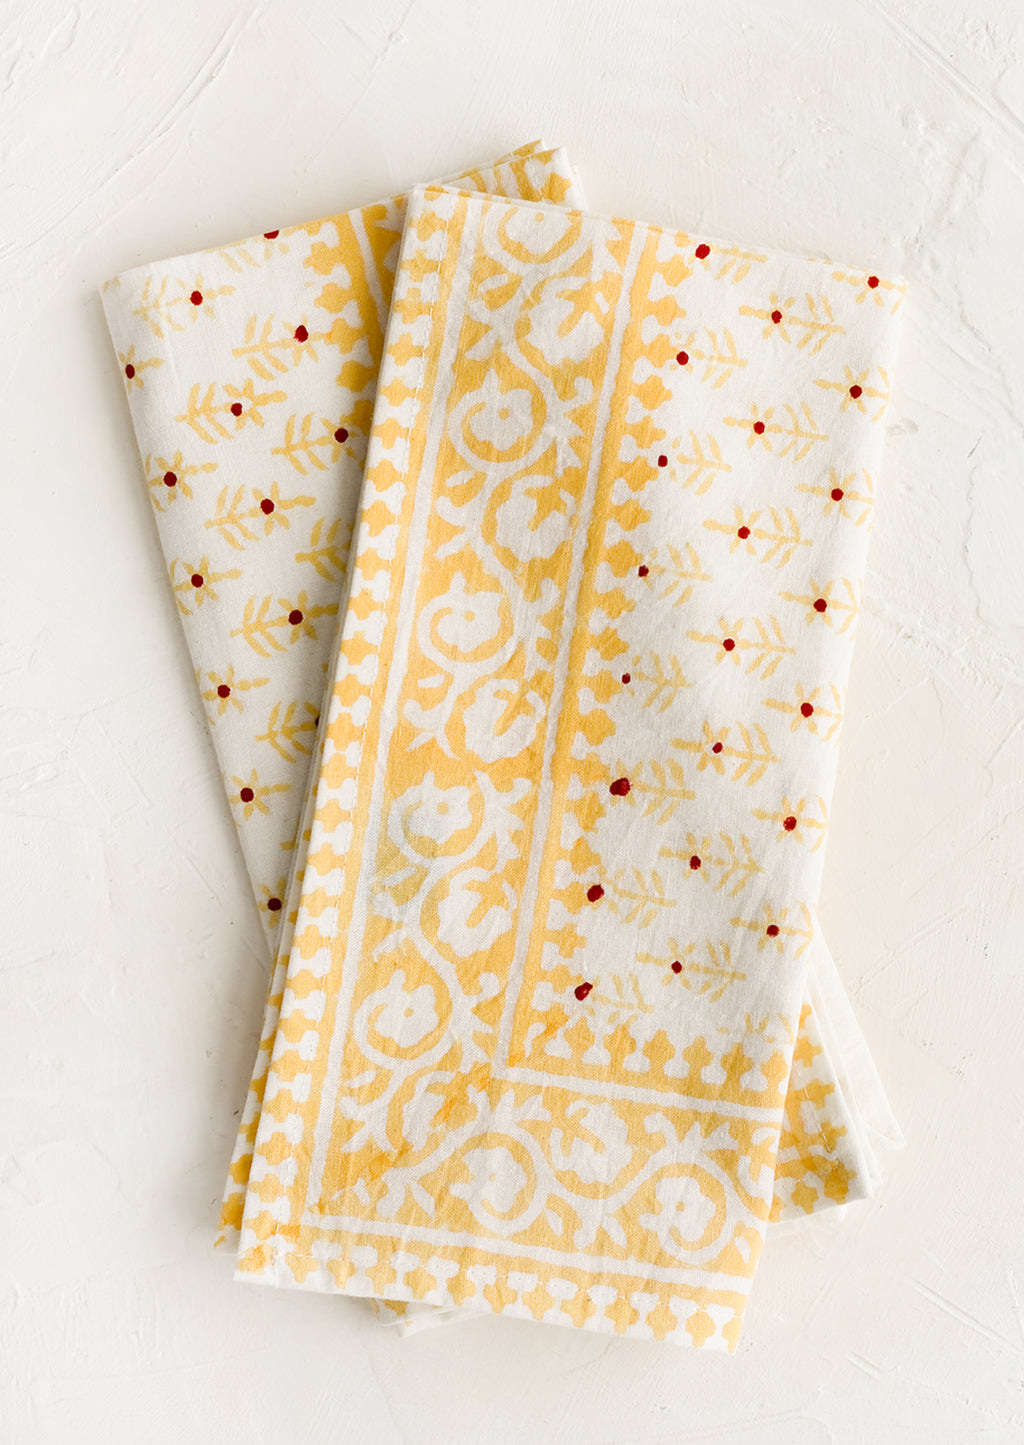 1: A pair of block printed napkins with yellow and red floral print.